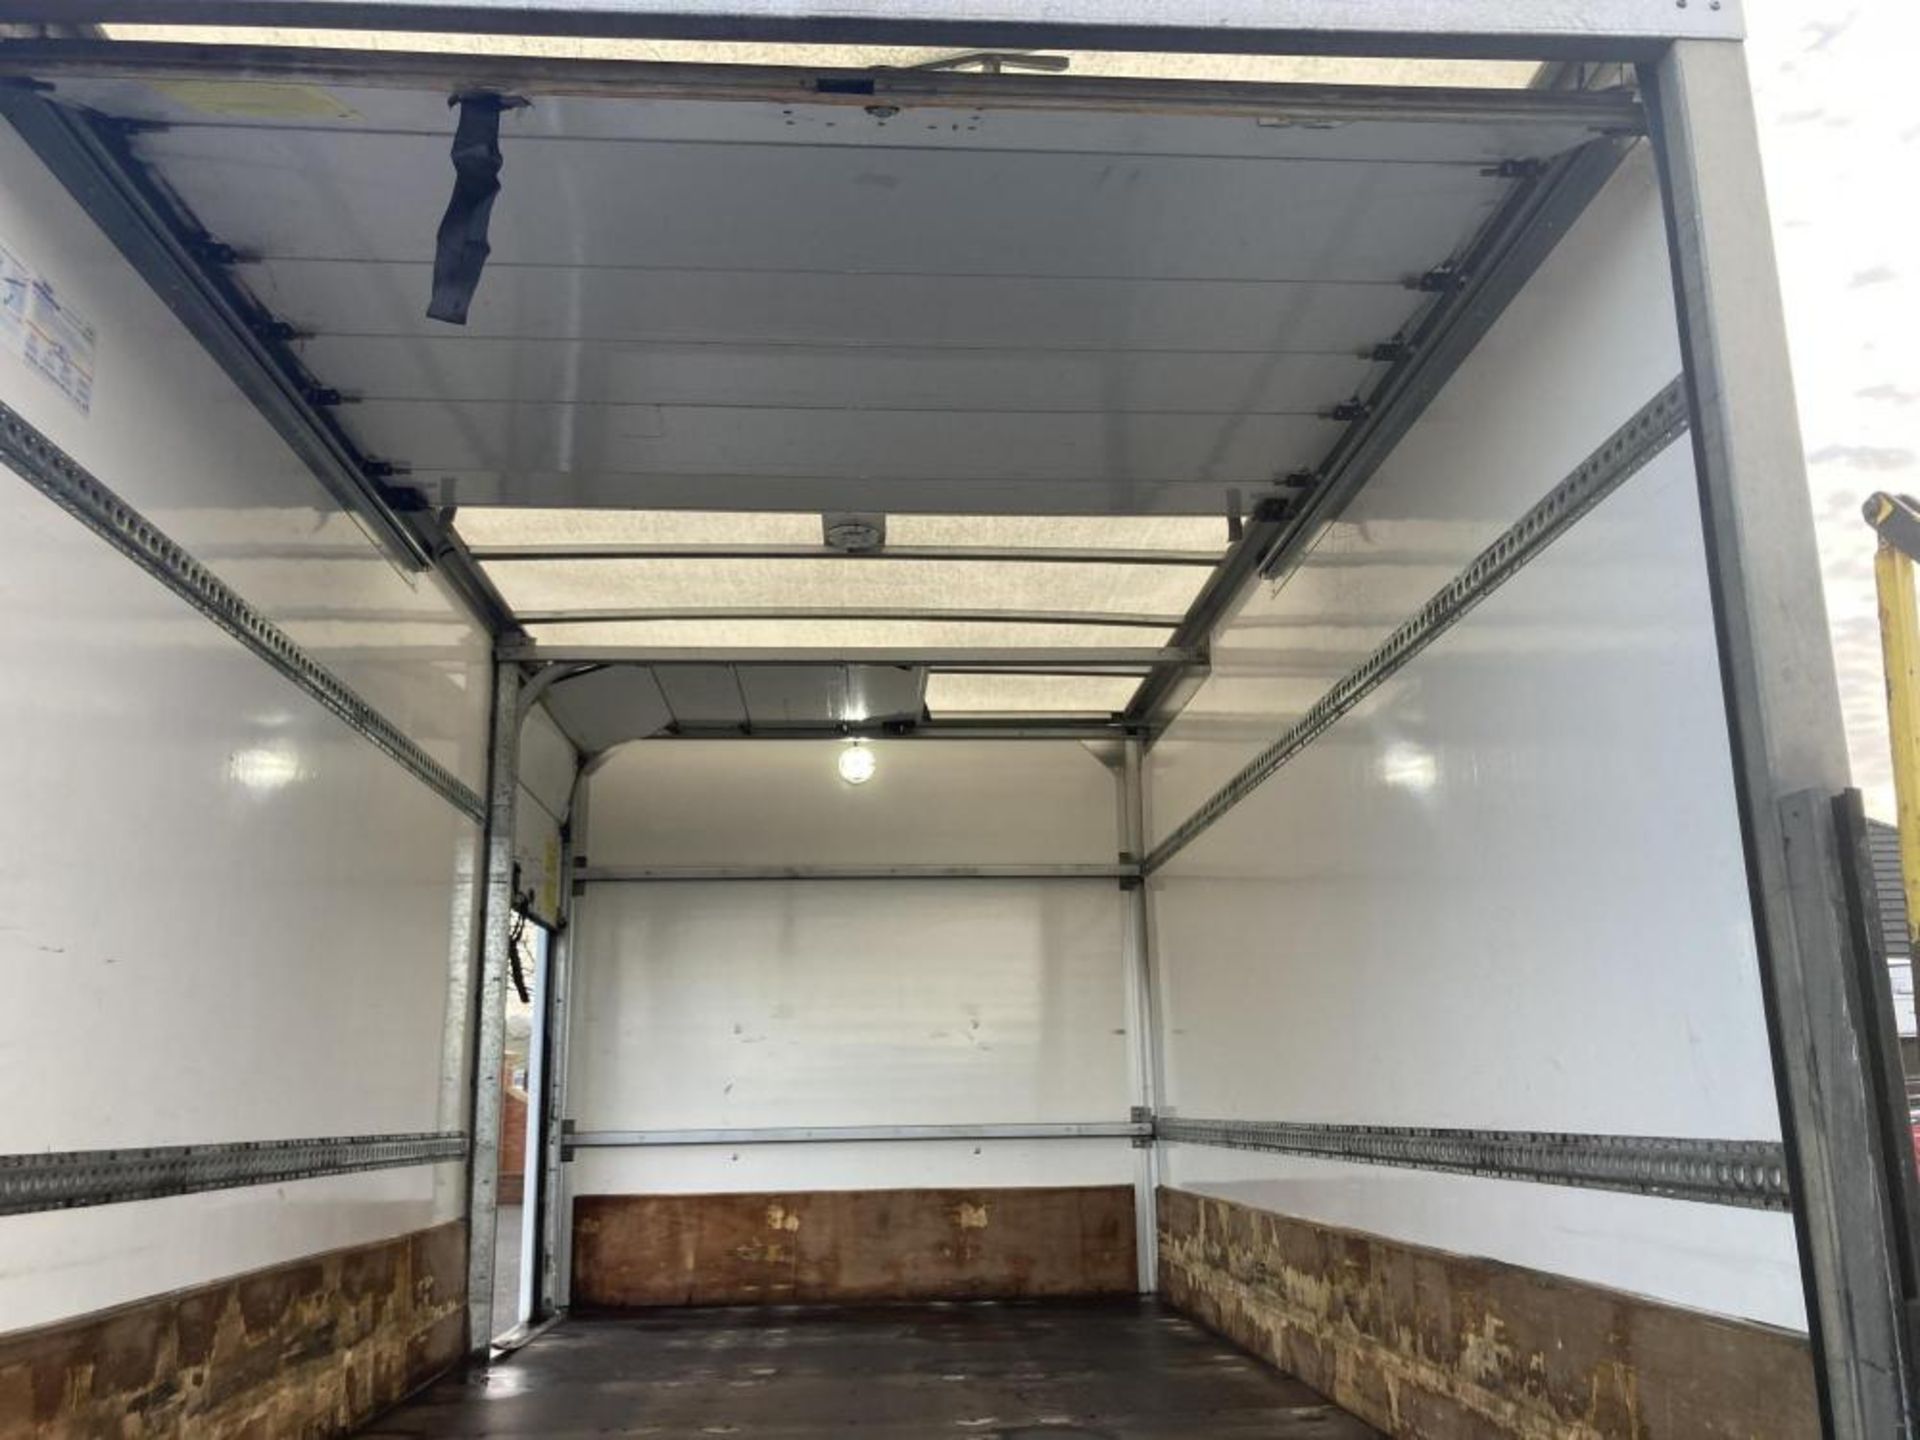 2018/68 IVECO DAILY 72-180 HIMATIC 15 ft BOX 7.2 ton Euro 6 with tail lift *PLUS VAT* - Image 5 of 12